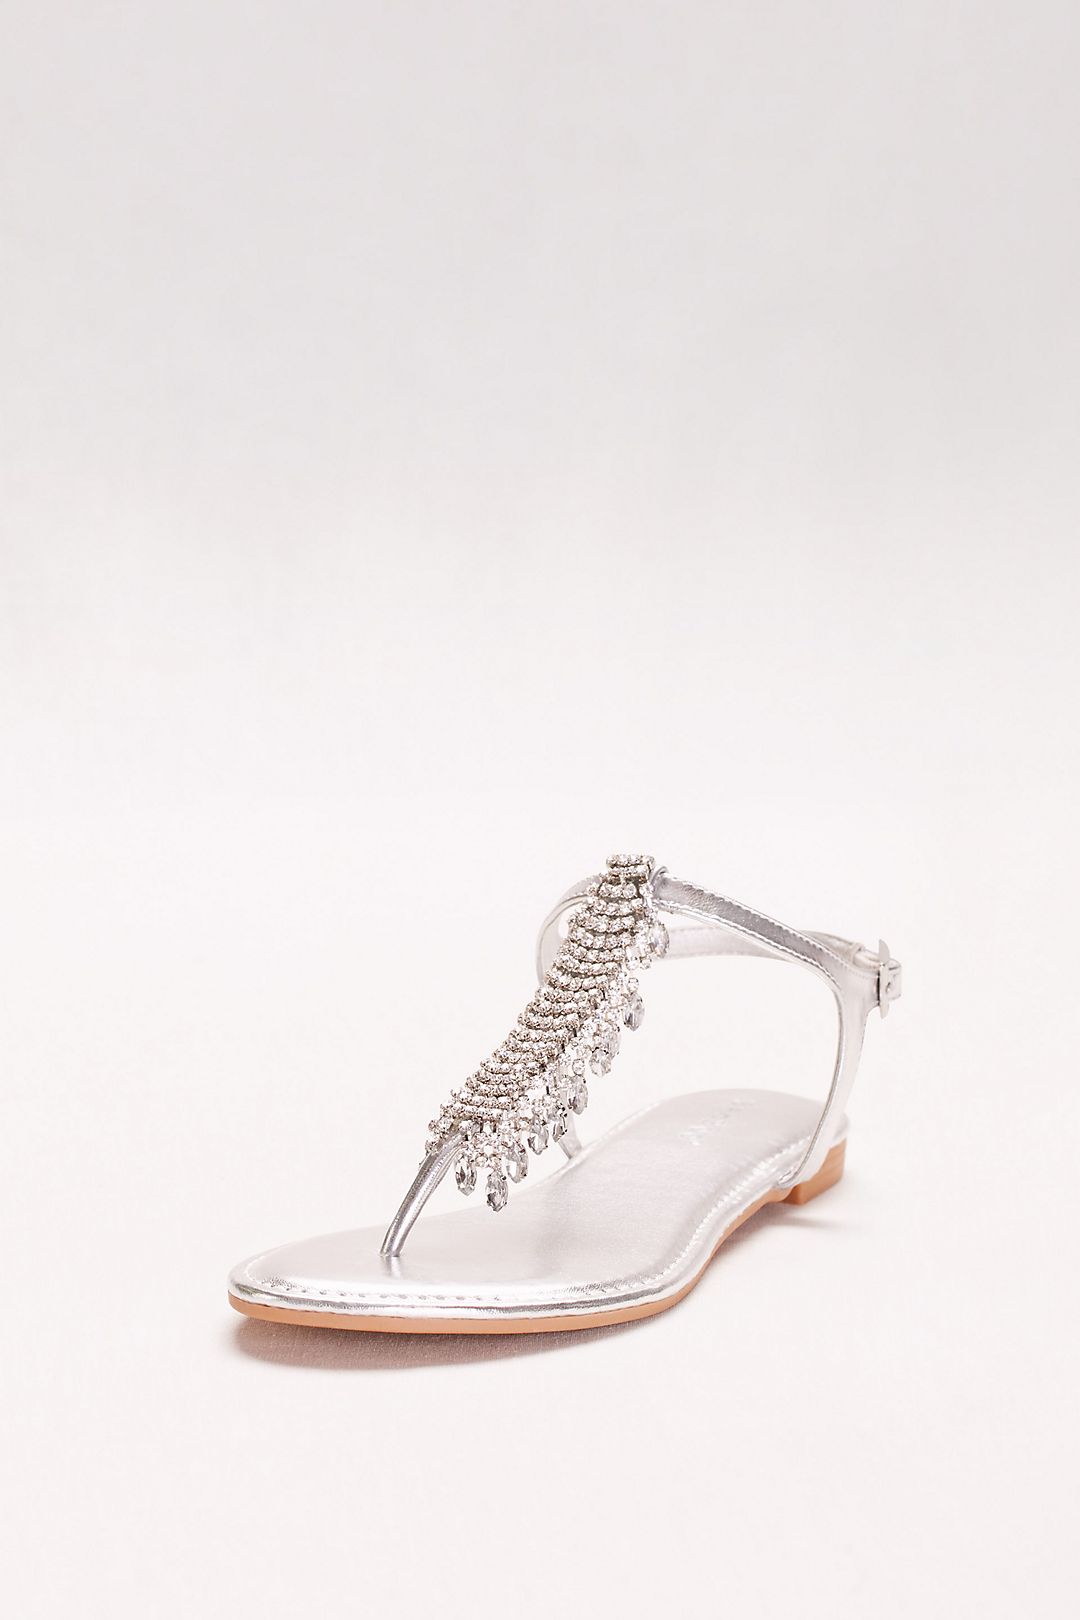 Metallic T-Strap Sandals with Dripping Crystals Image 4